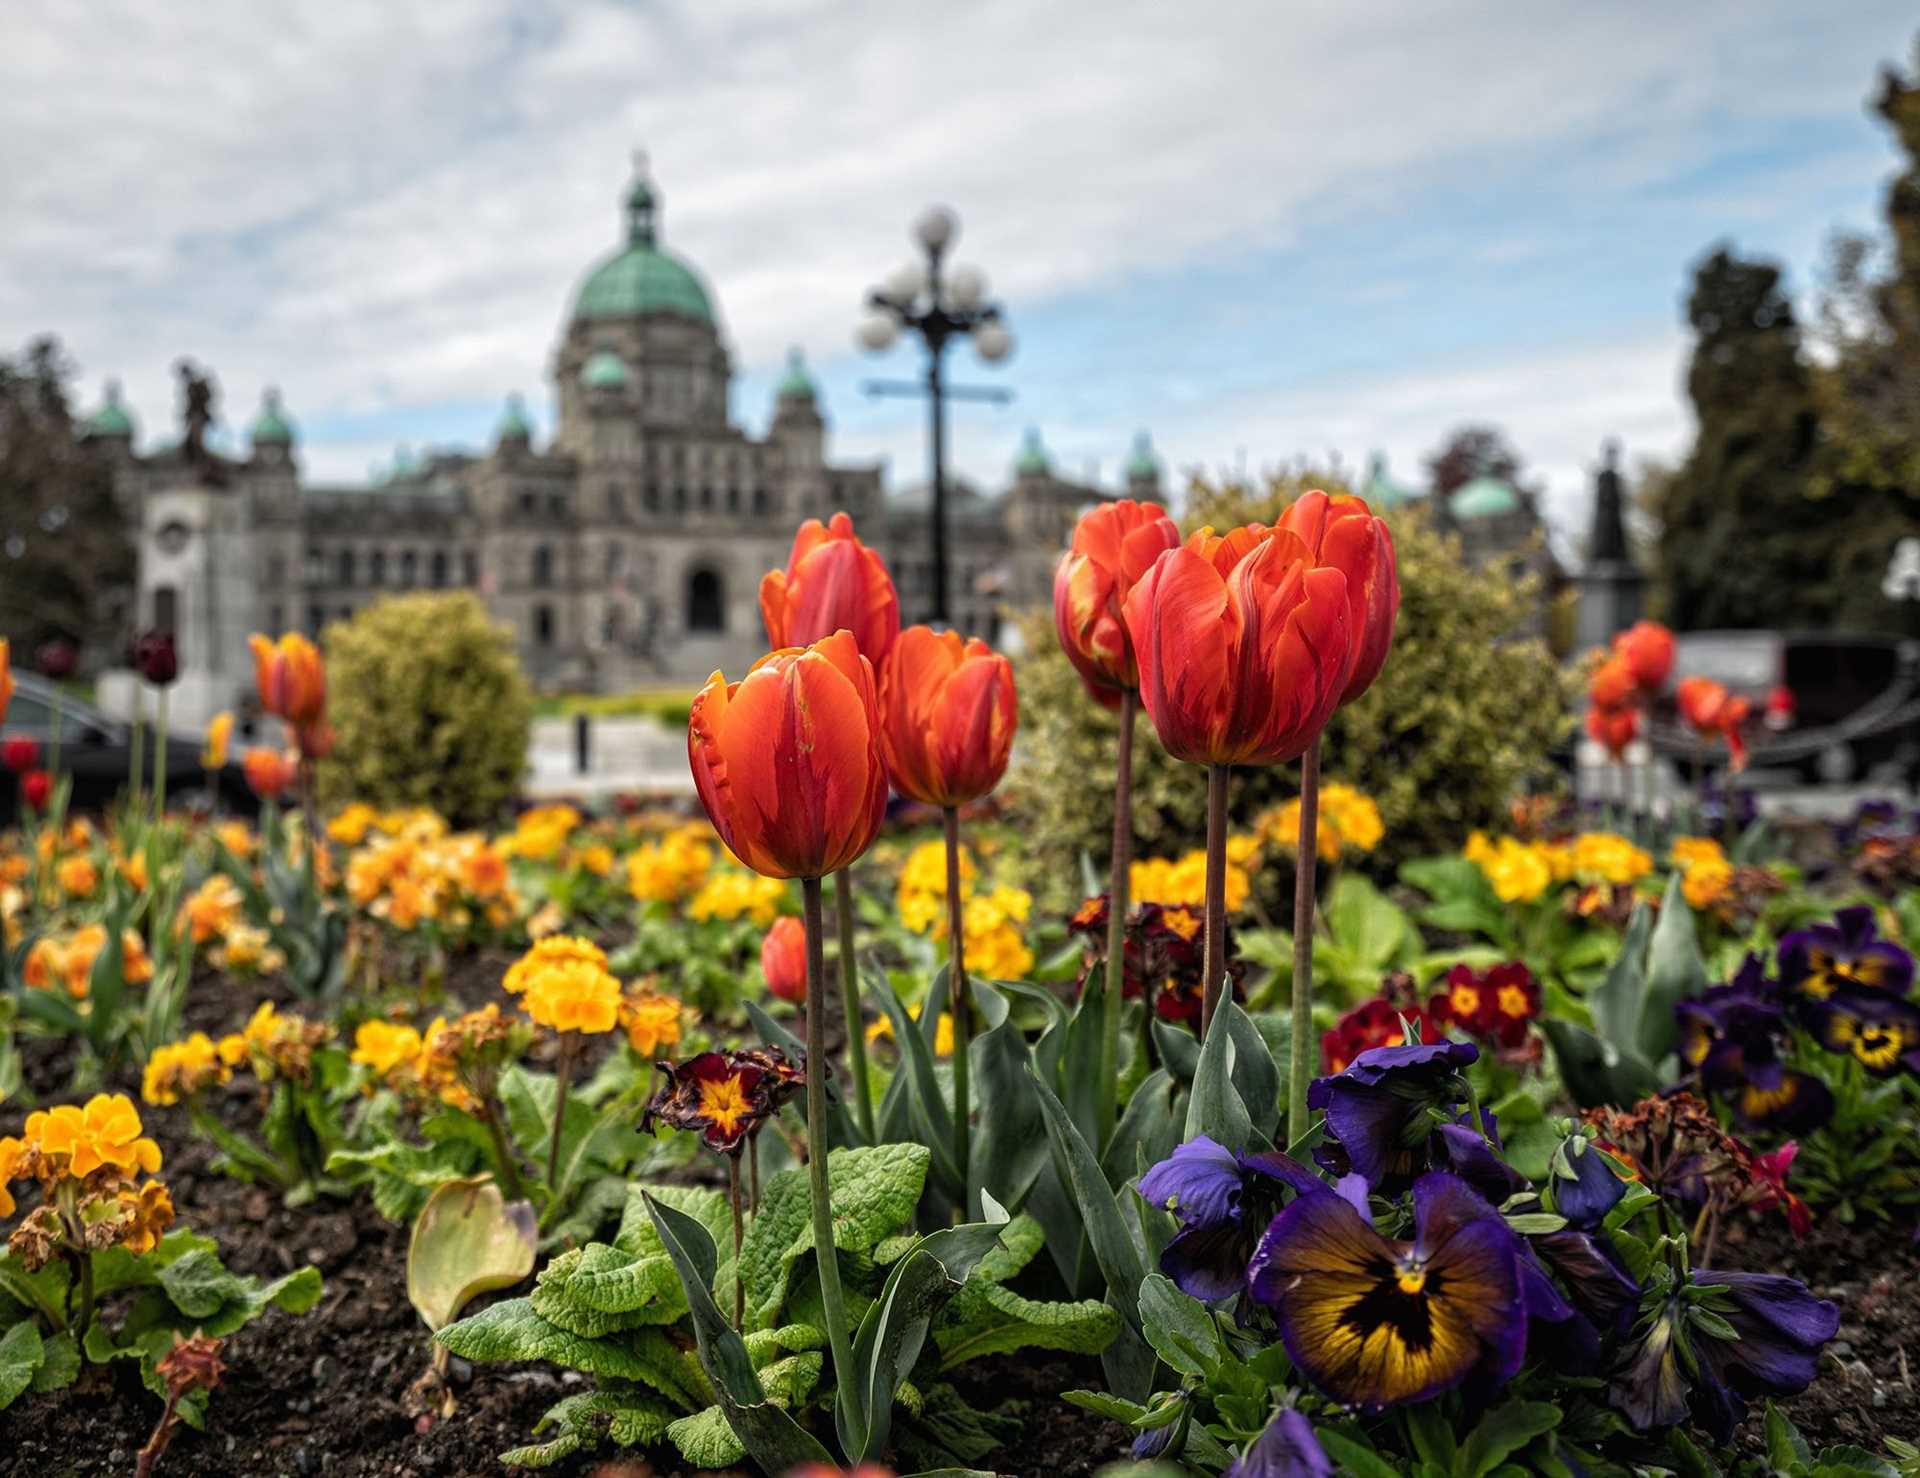 tulips in the foreground with Victoria's legislative assembly building in the background